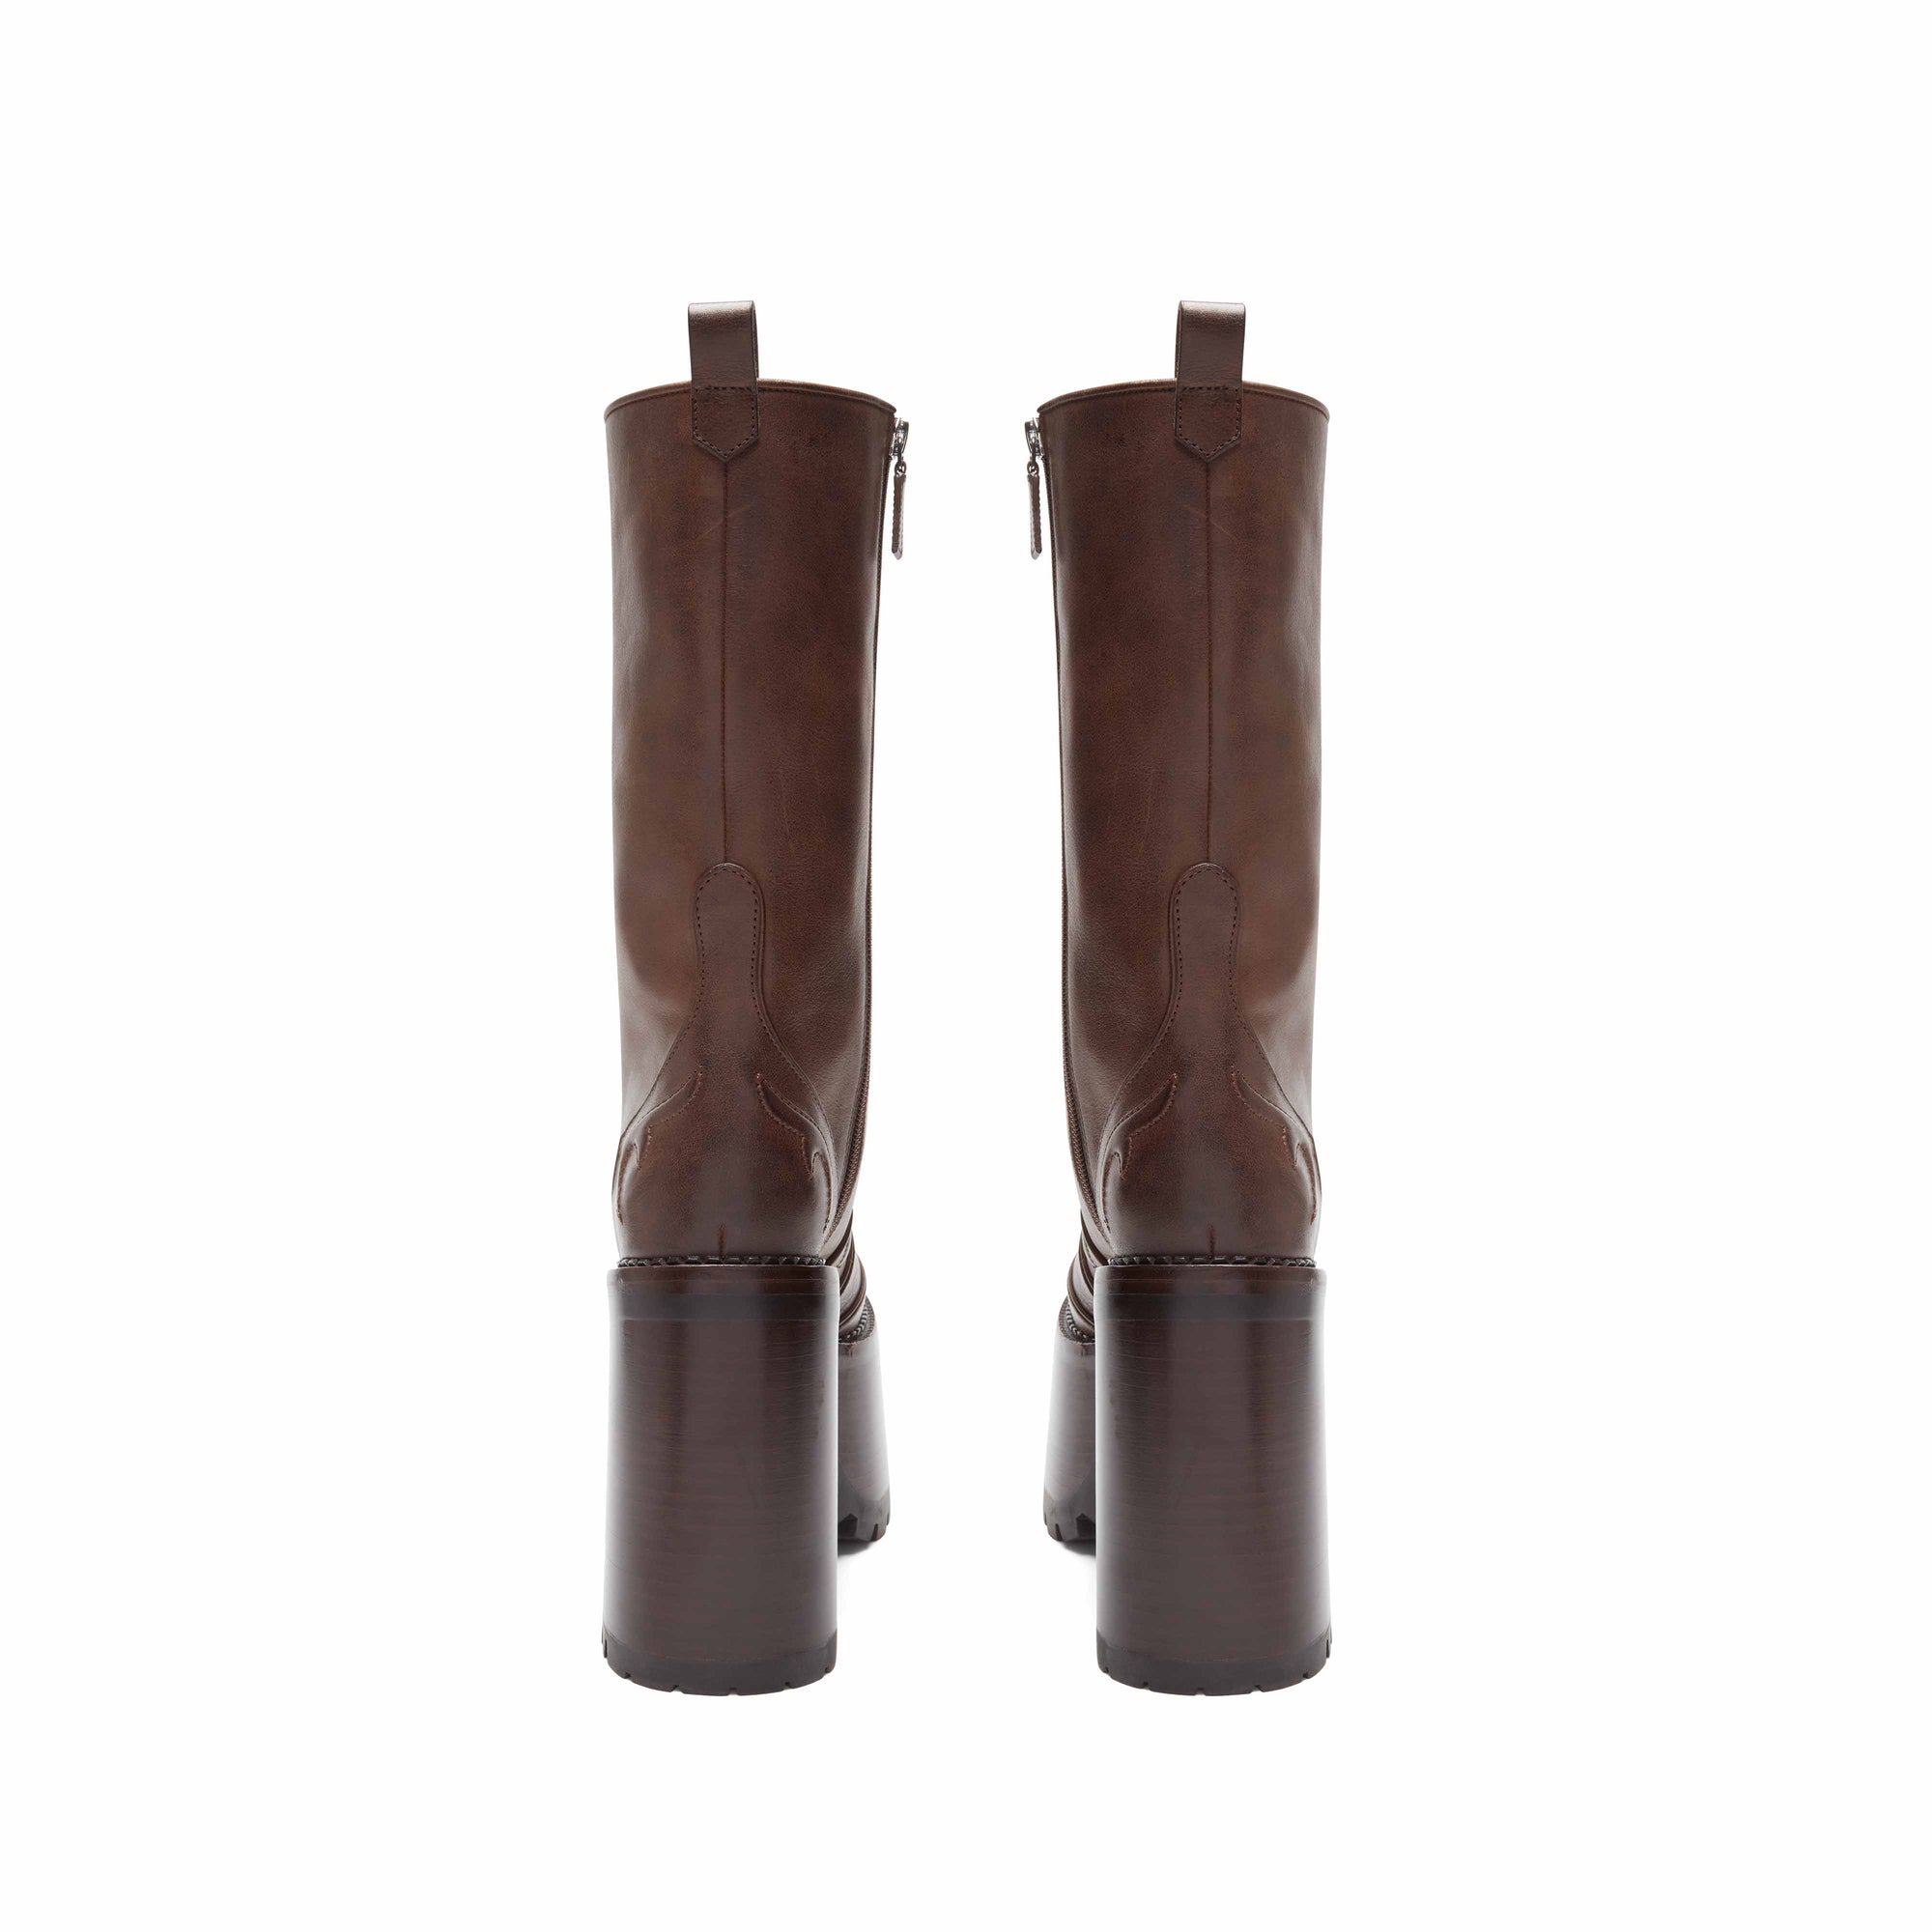 Heaven by Marc Jacobs - Women’s Margaret Boot - (Chocolate) view 3